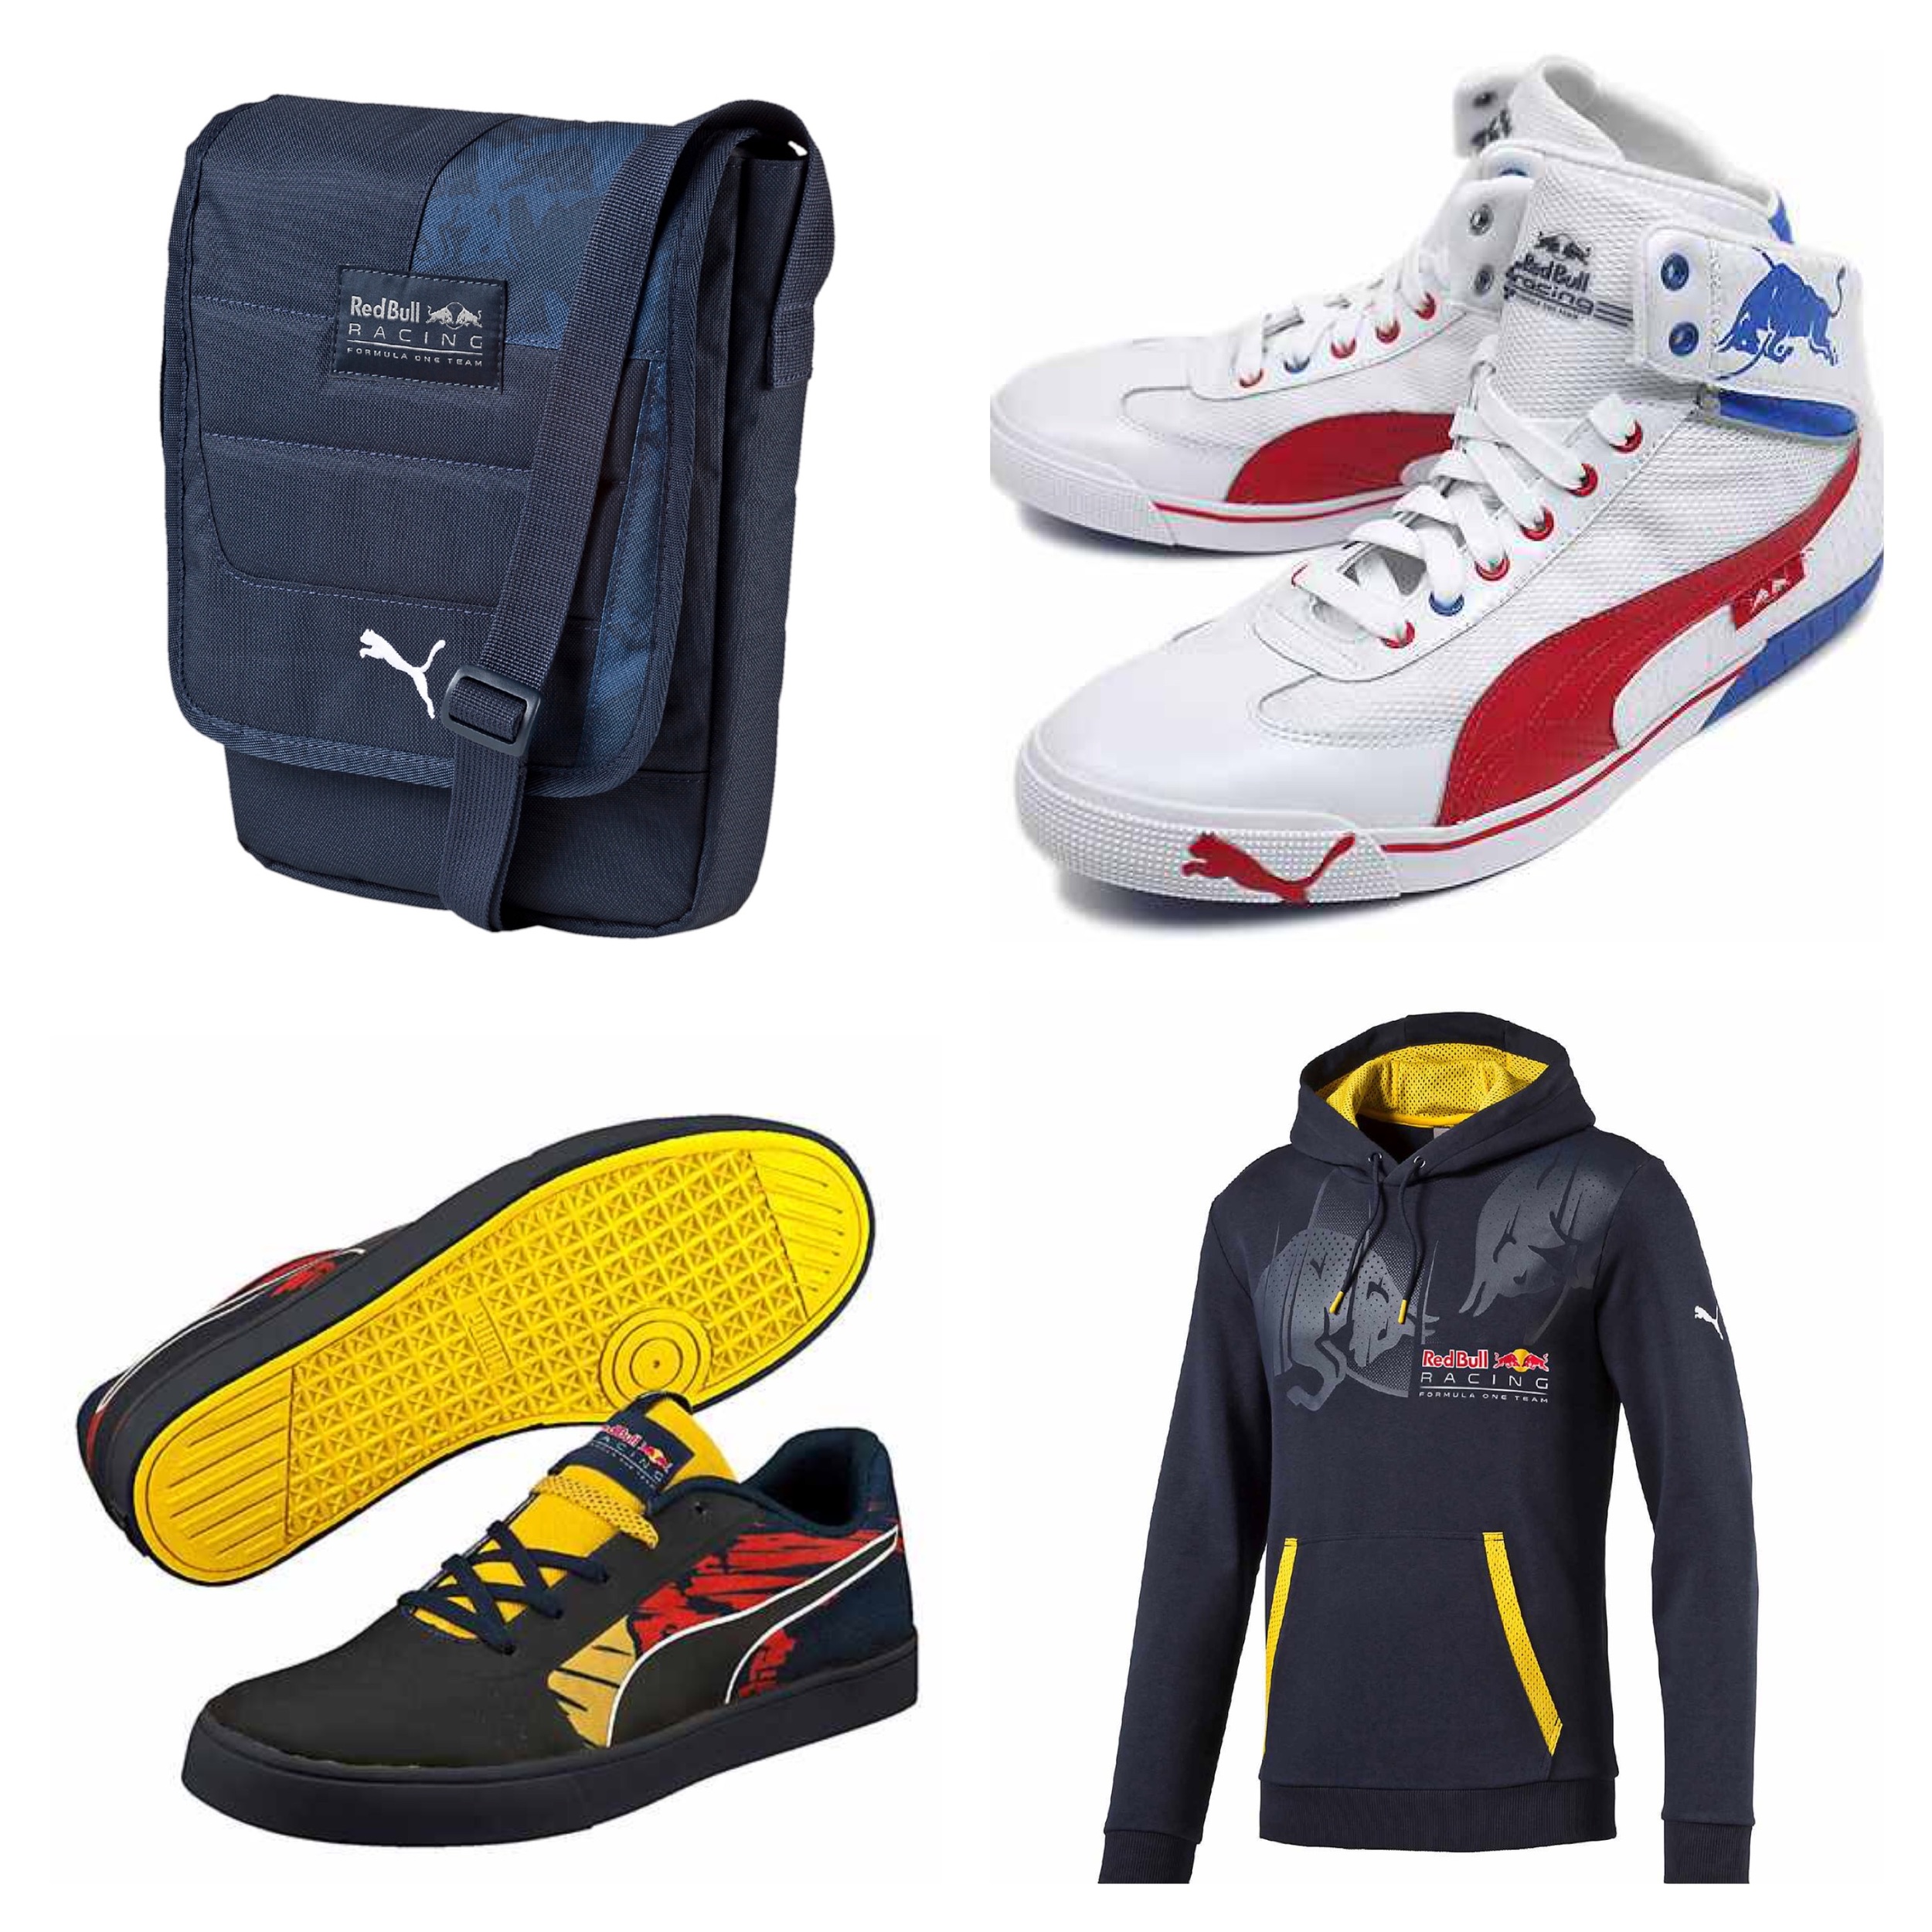 puma red bull collection